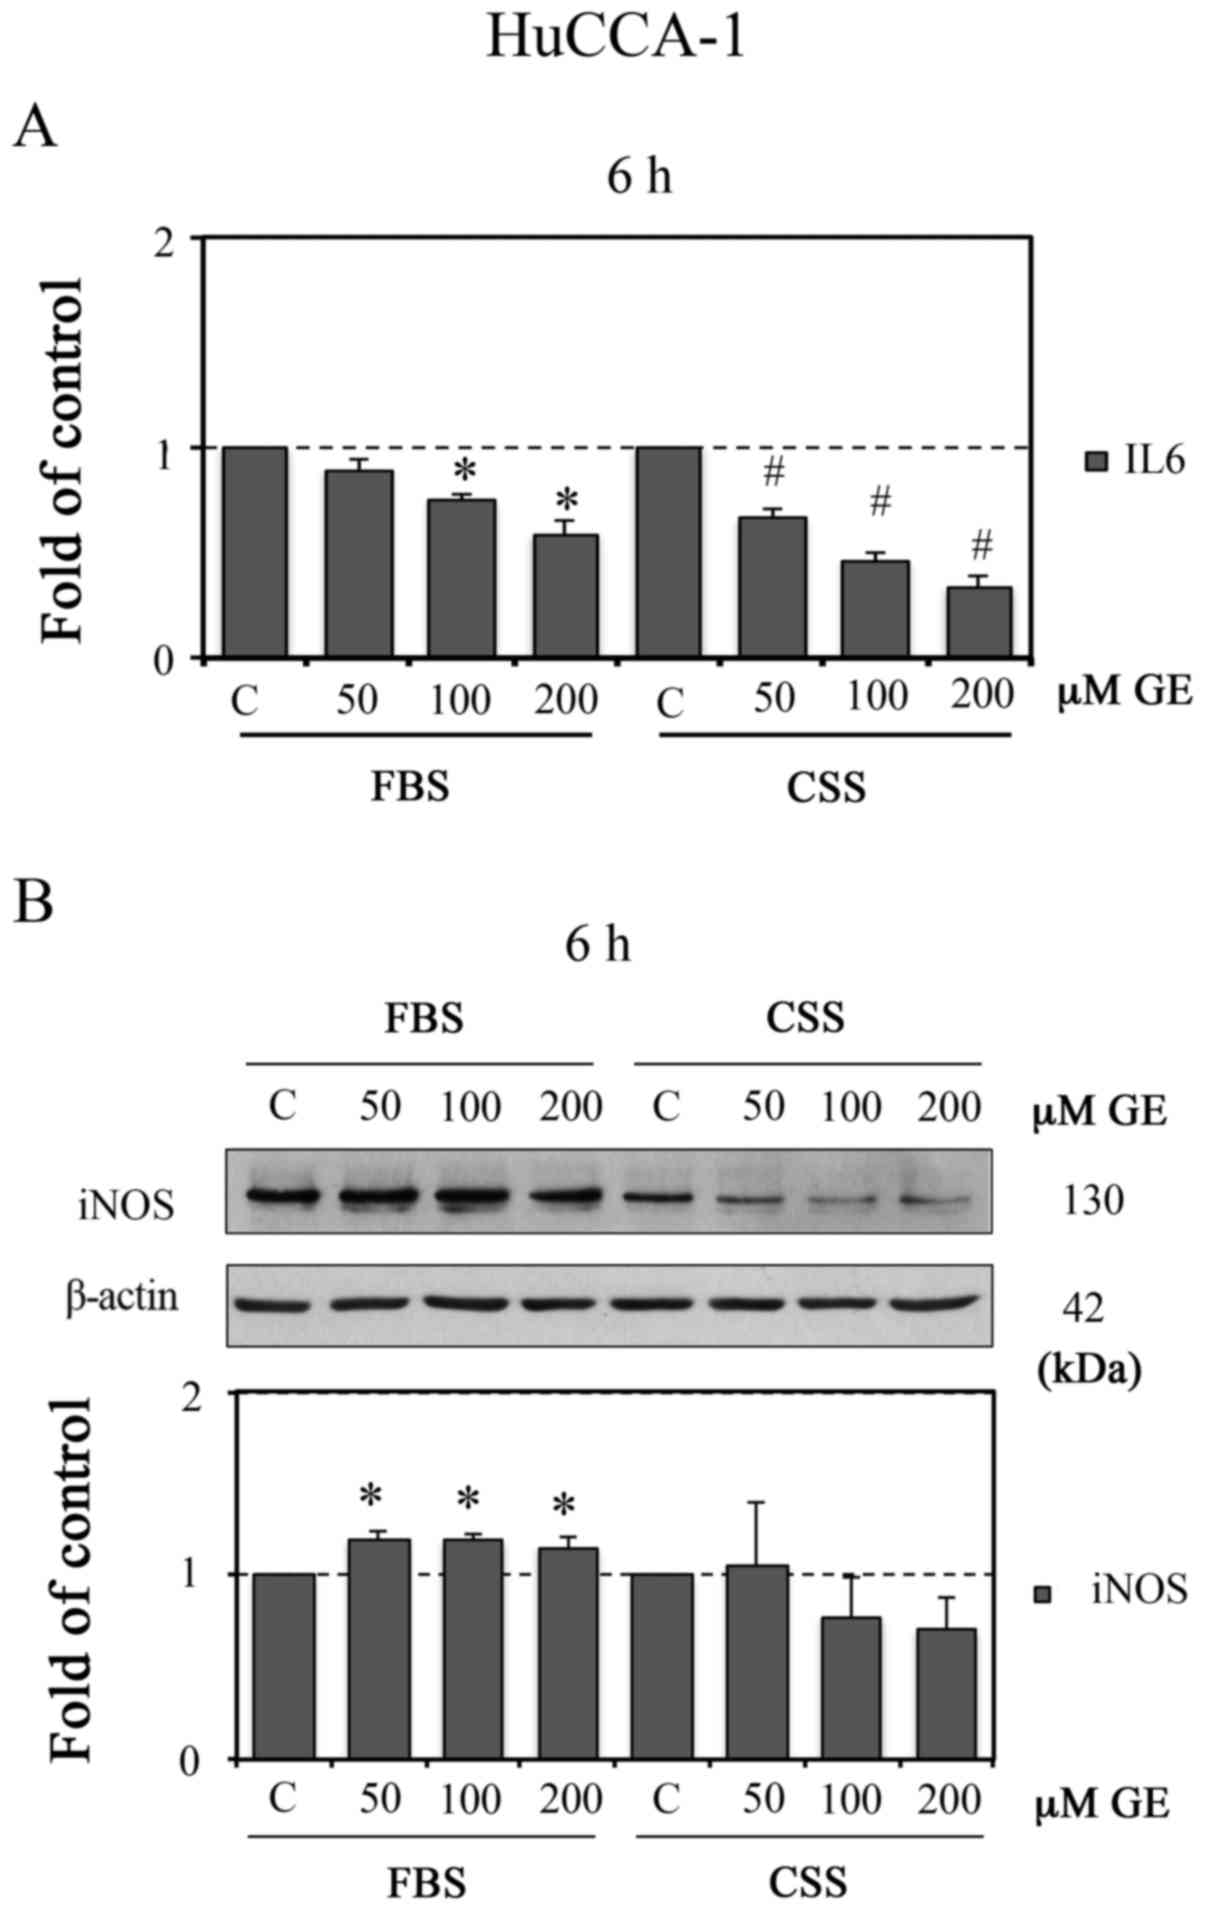 Genistein Reduces The Activation Of Akt And Egfr And The Production Of Il6 In Cholangiocarcinoma Cells Involving Estrogen And Estrogen Receptors